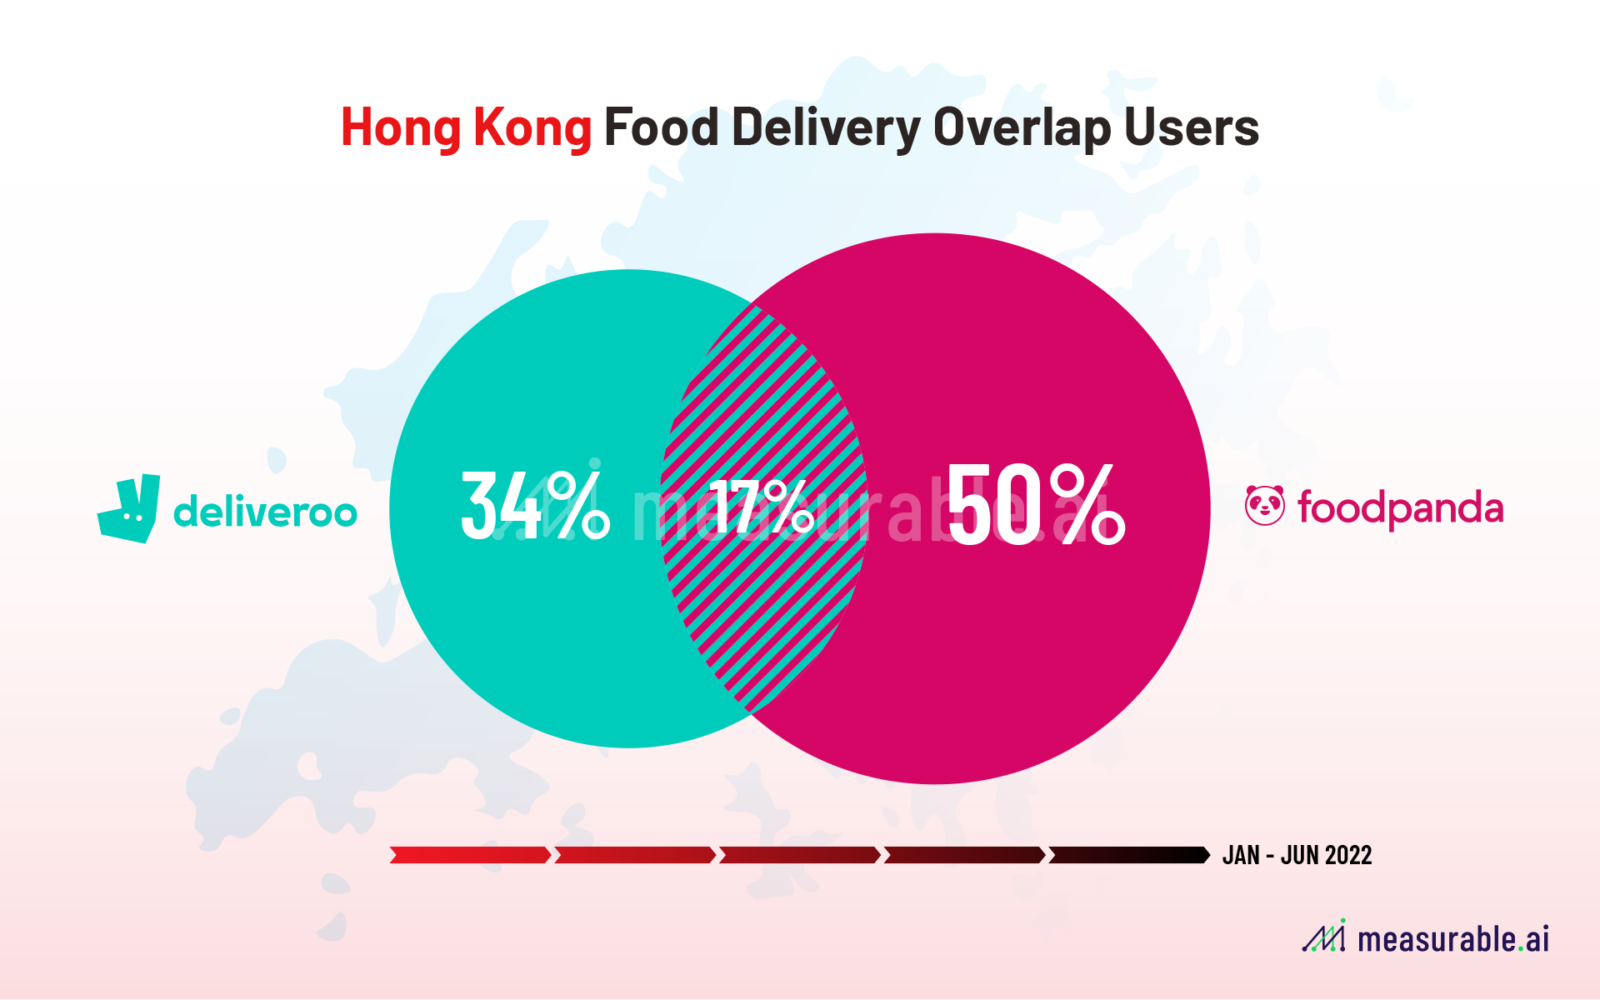 Hong Kong Food Delivery Overlap Users